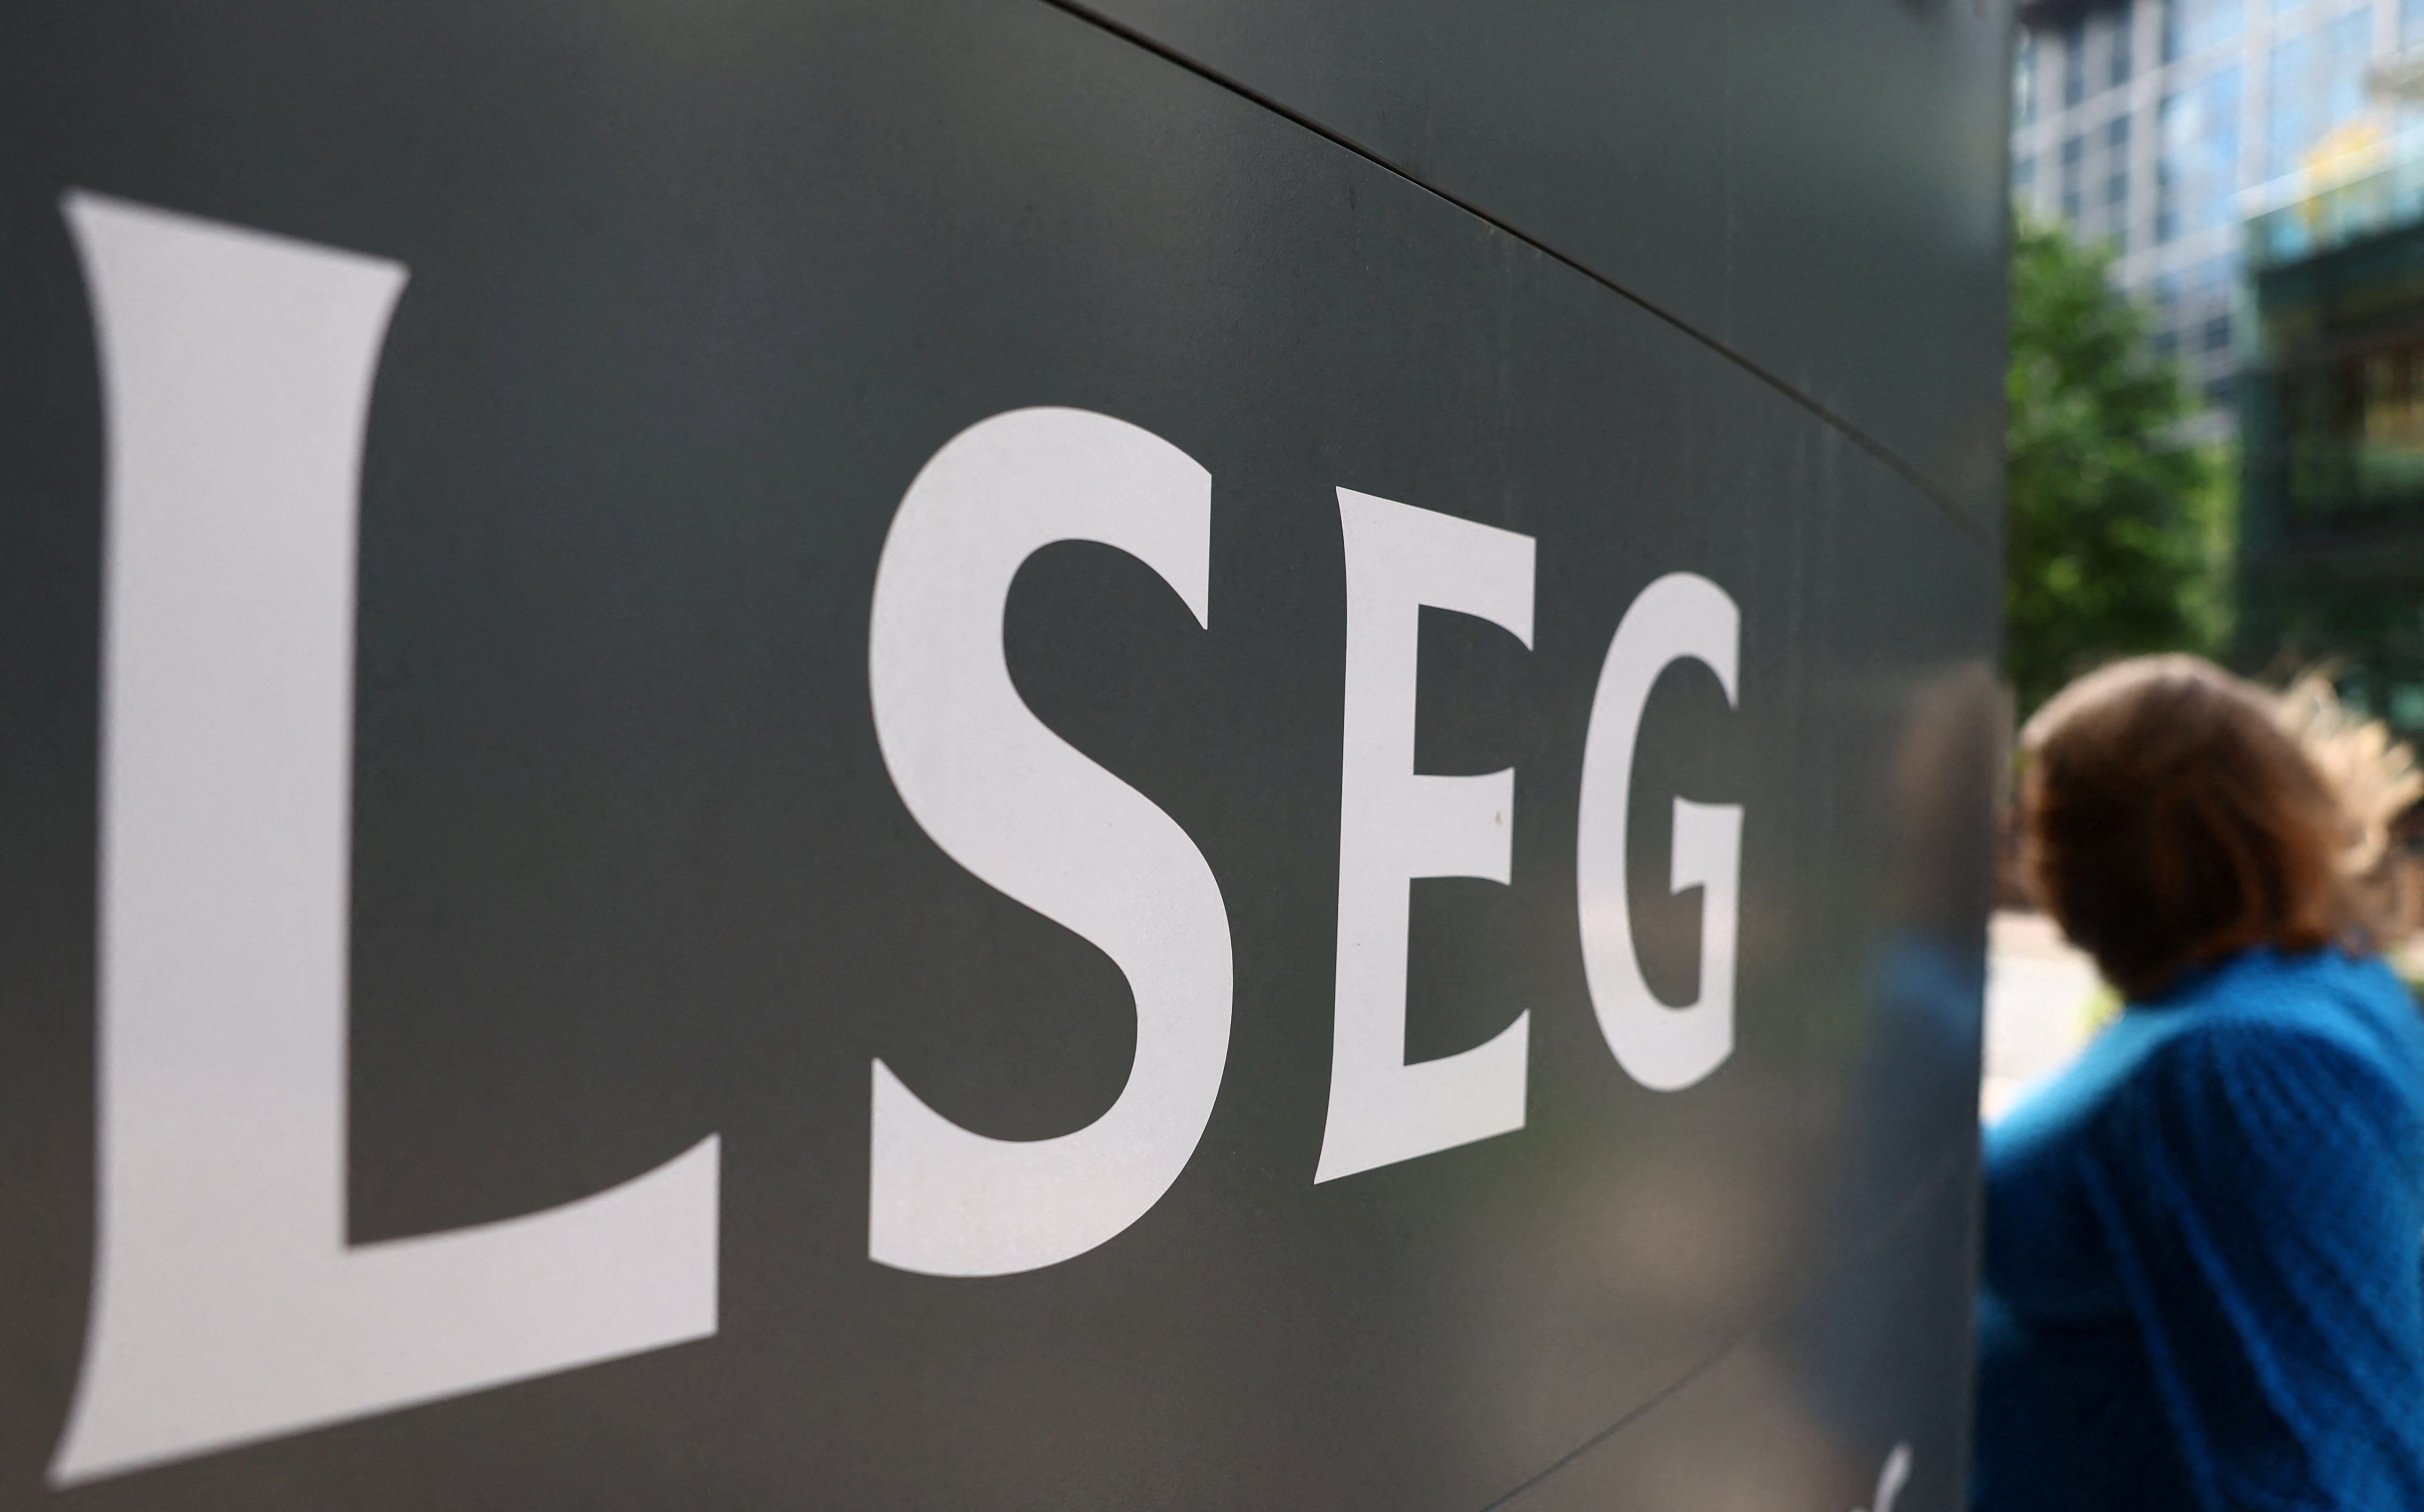 Signage for the London Stock Exchange Group is seen outside of offices in Canary Wharf in London